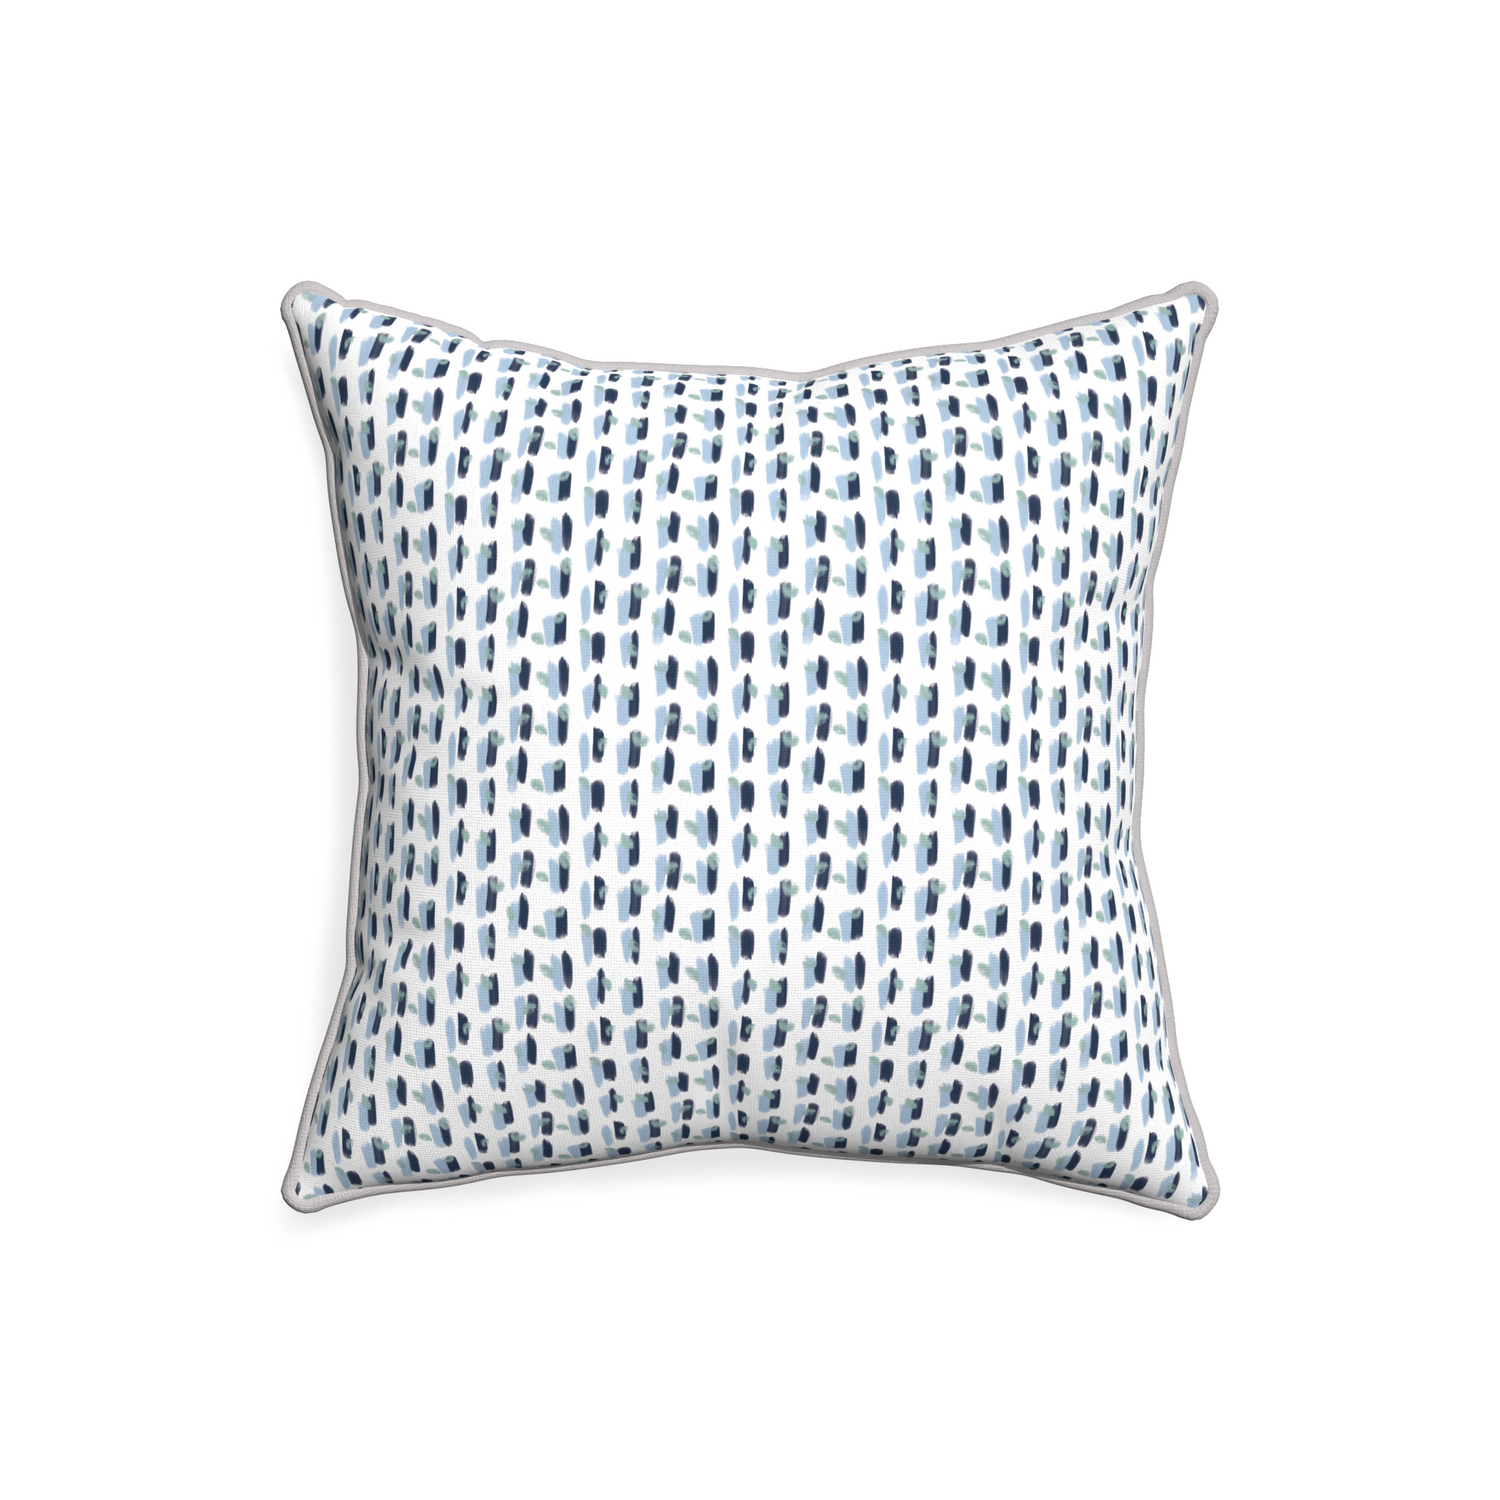 20-square poppy blue custom pillow with pebble piping on white background